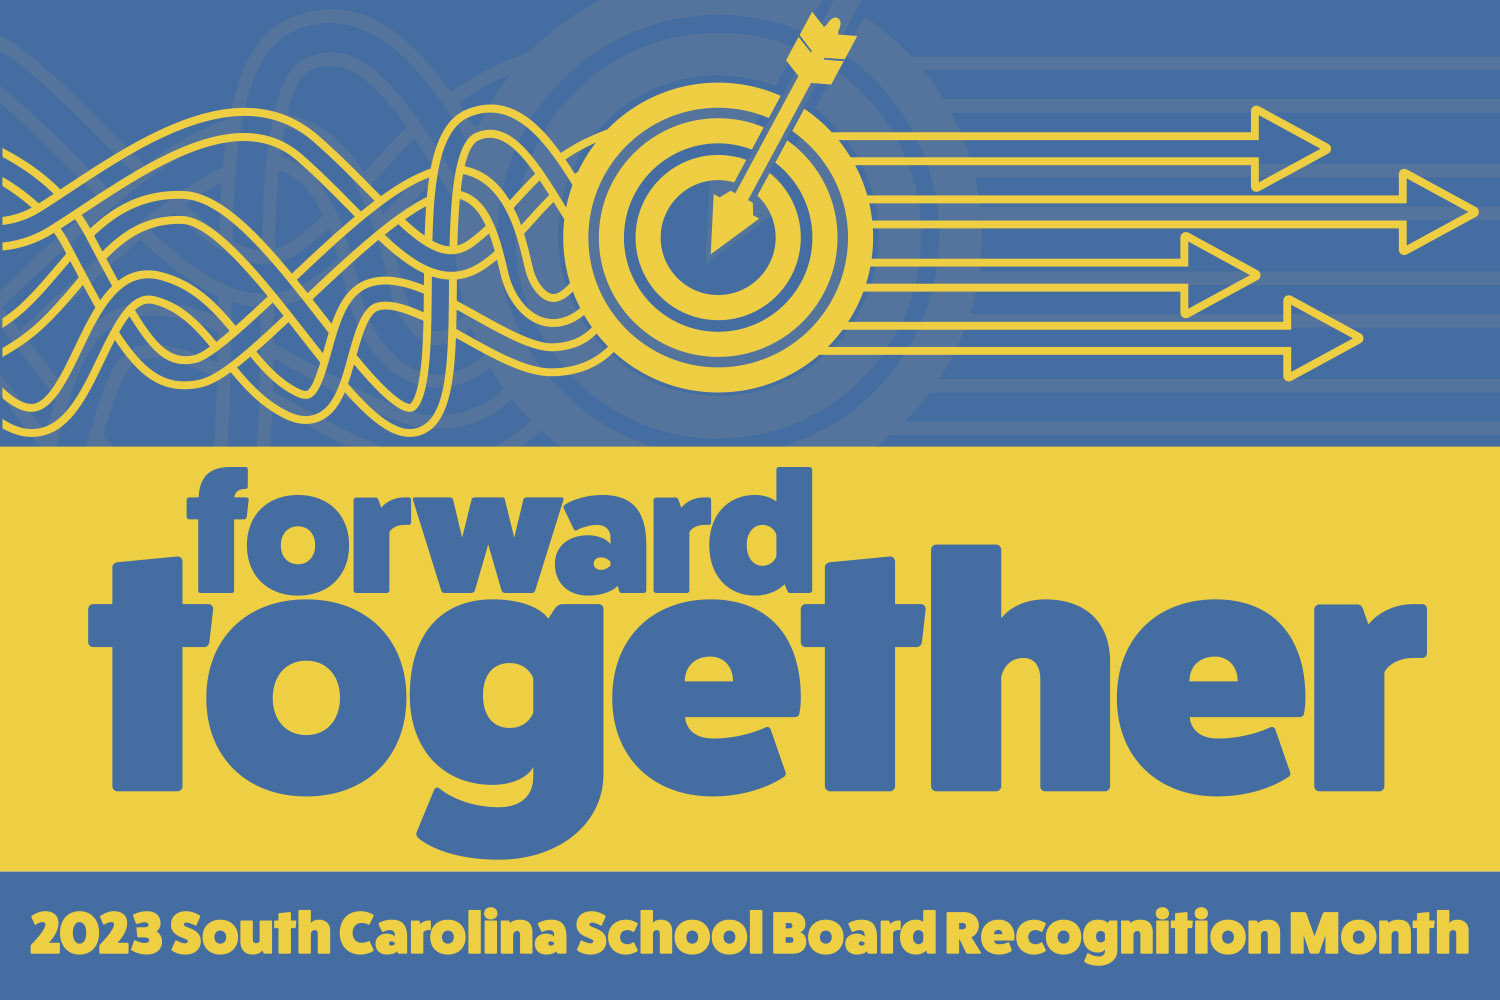 2023 SC SCHOOL BOARD RECOGNITION MONTH